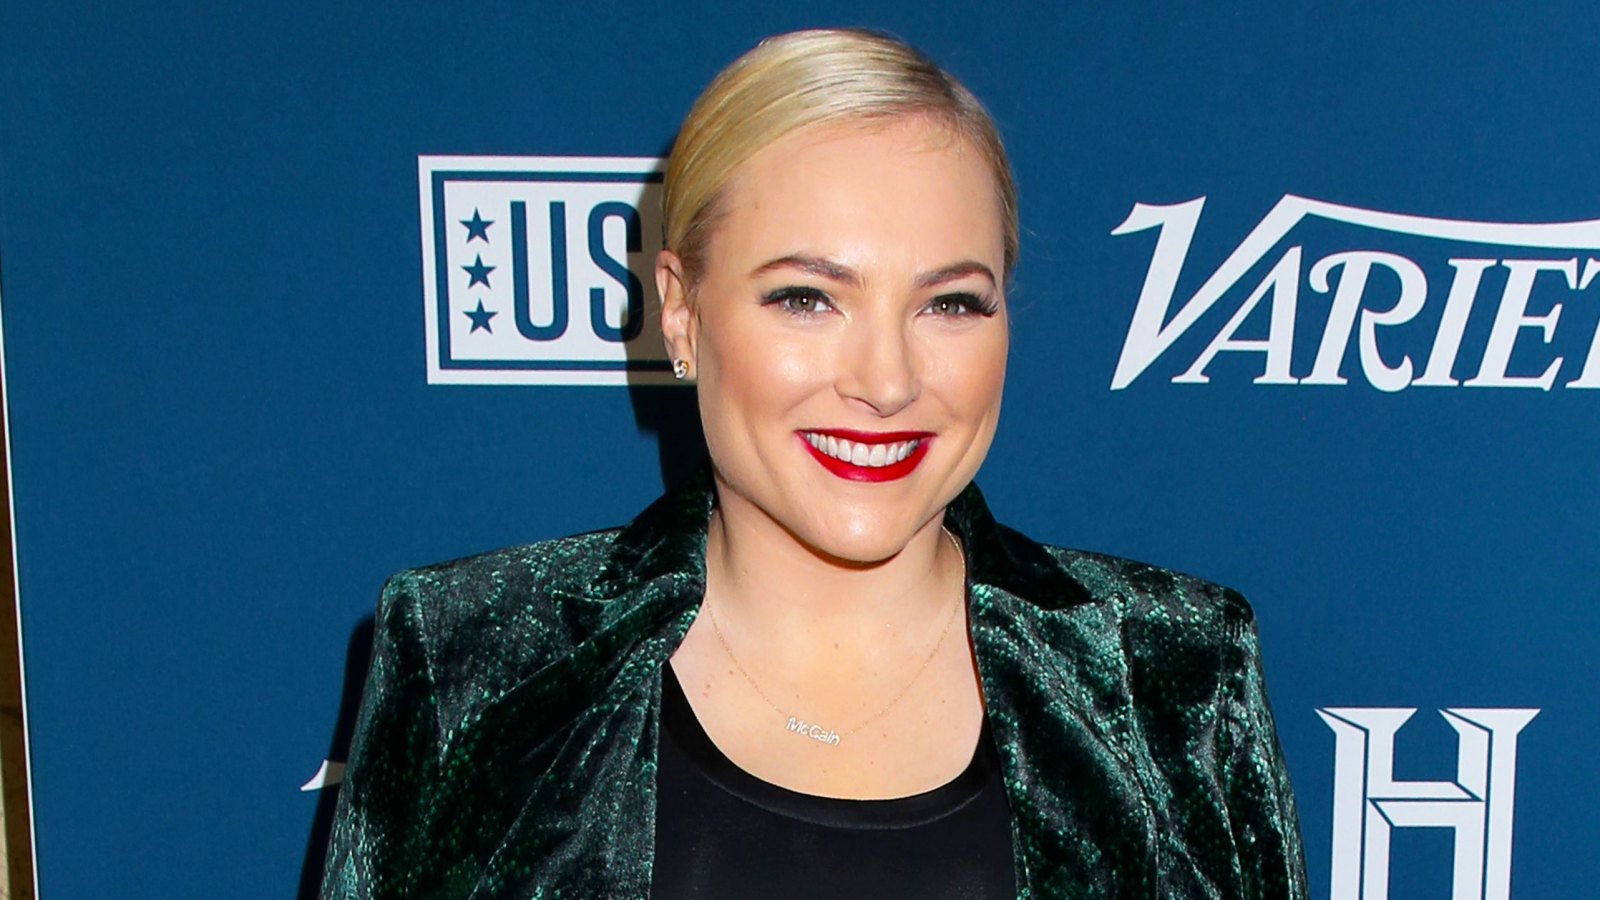 Meghan McCain Is Pregnant, Expecting First Child With Husband Ben Domenech